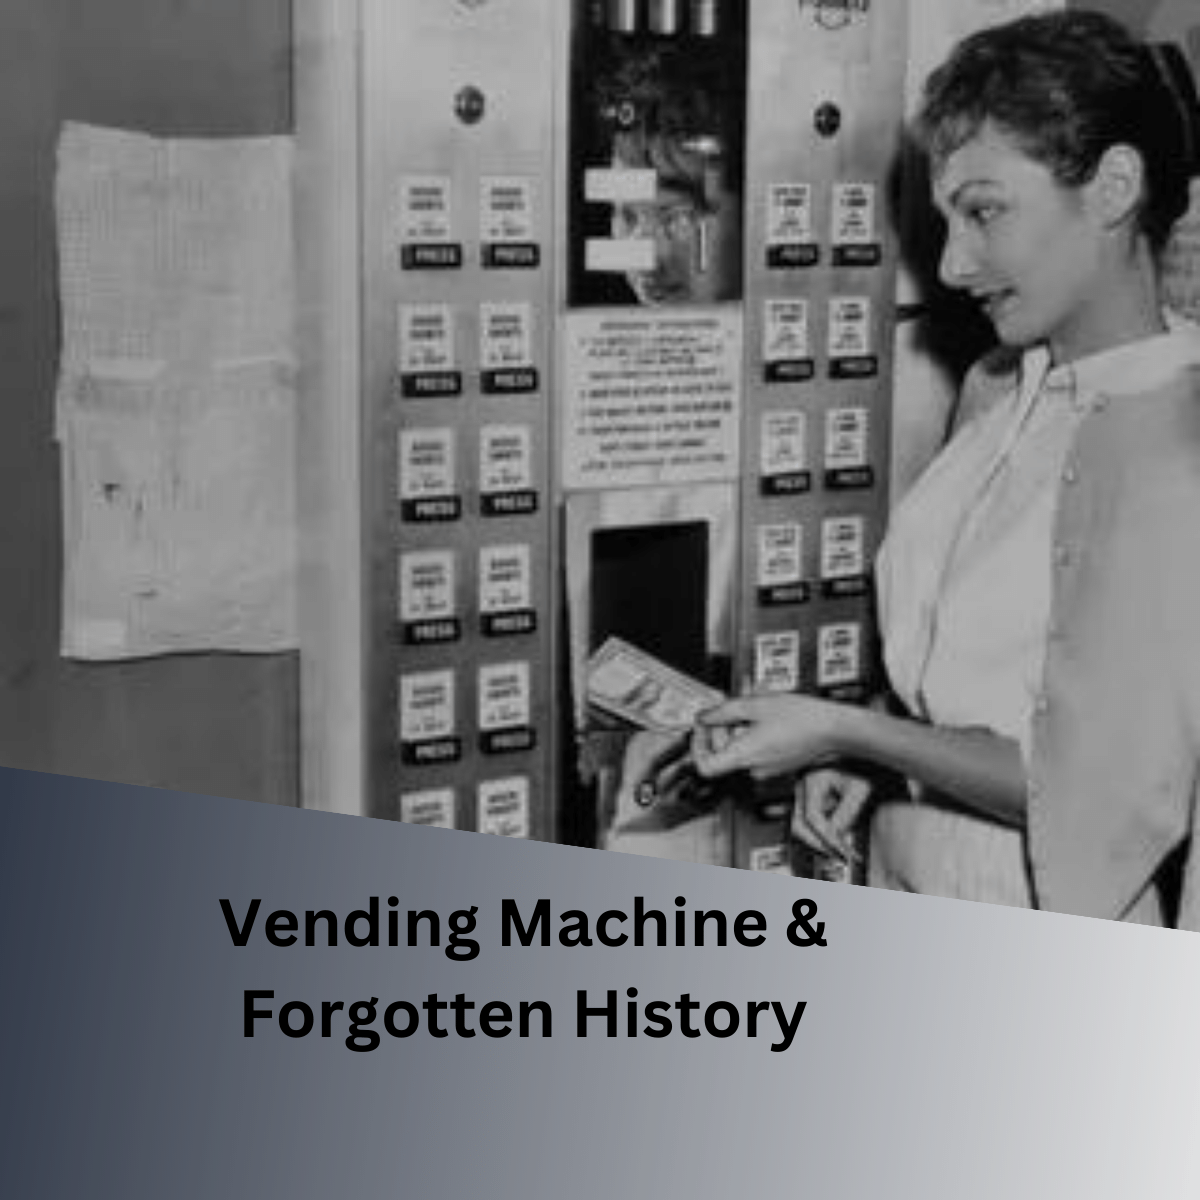 A BRIEF HISTORY OF VENDING MACHINES